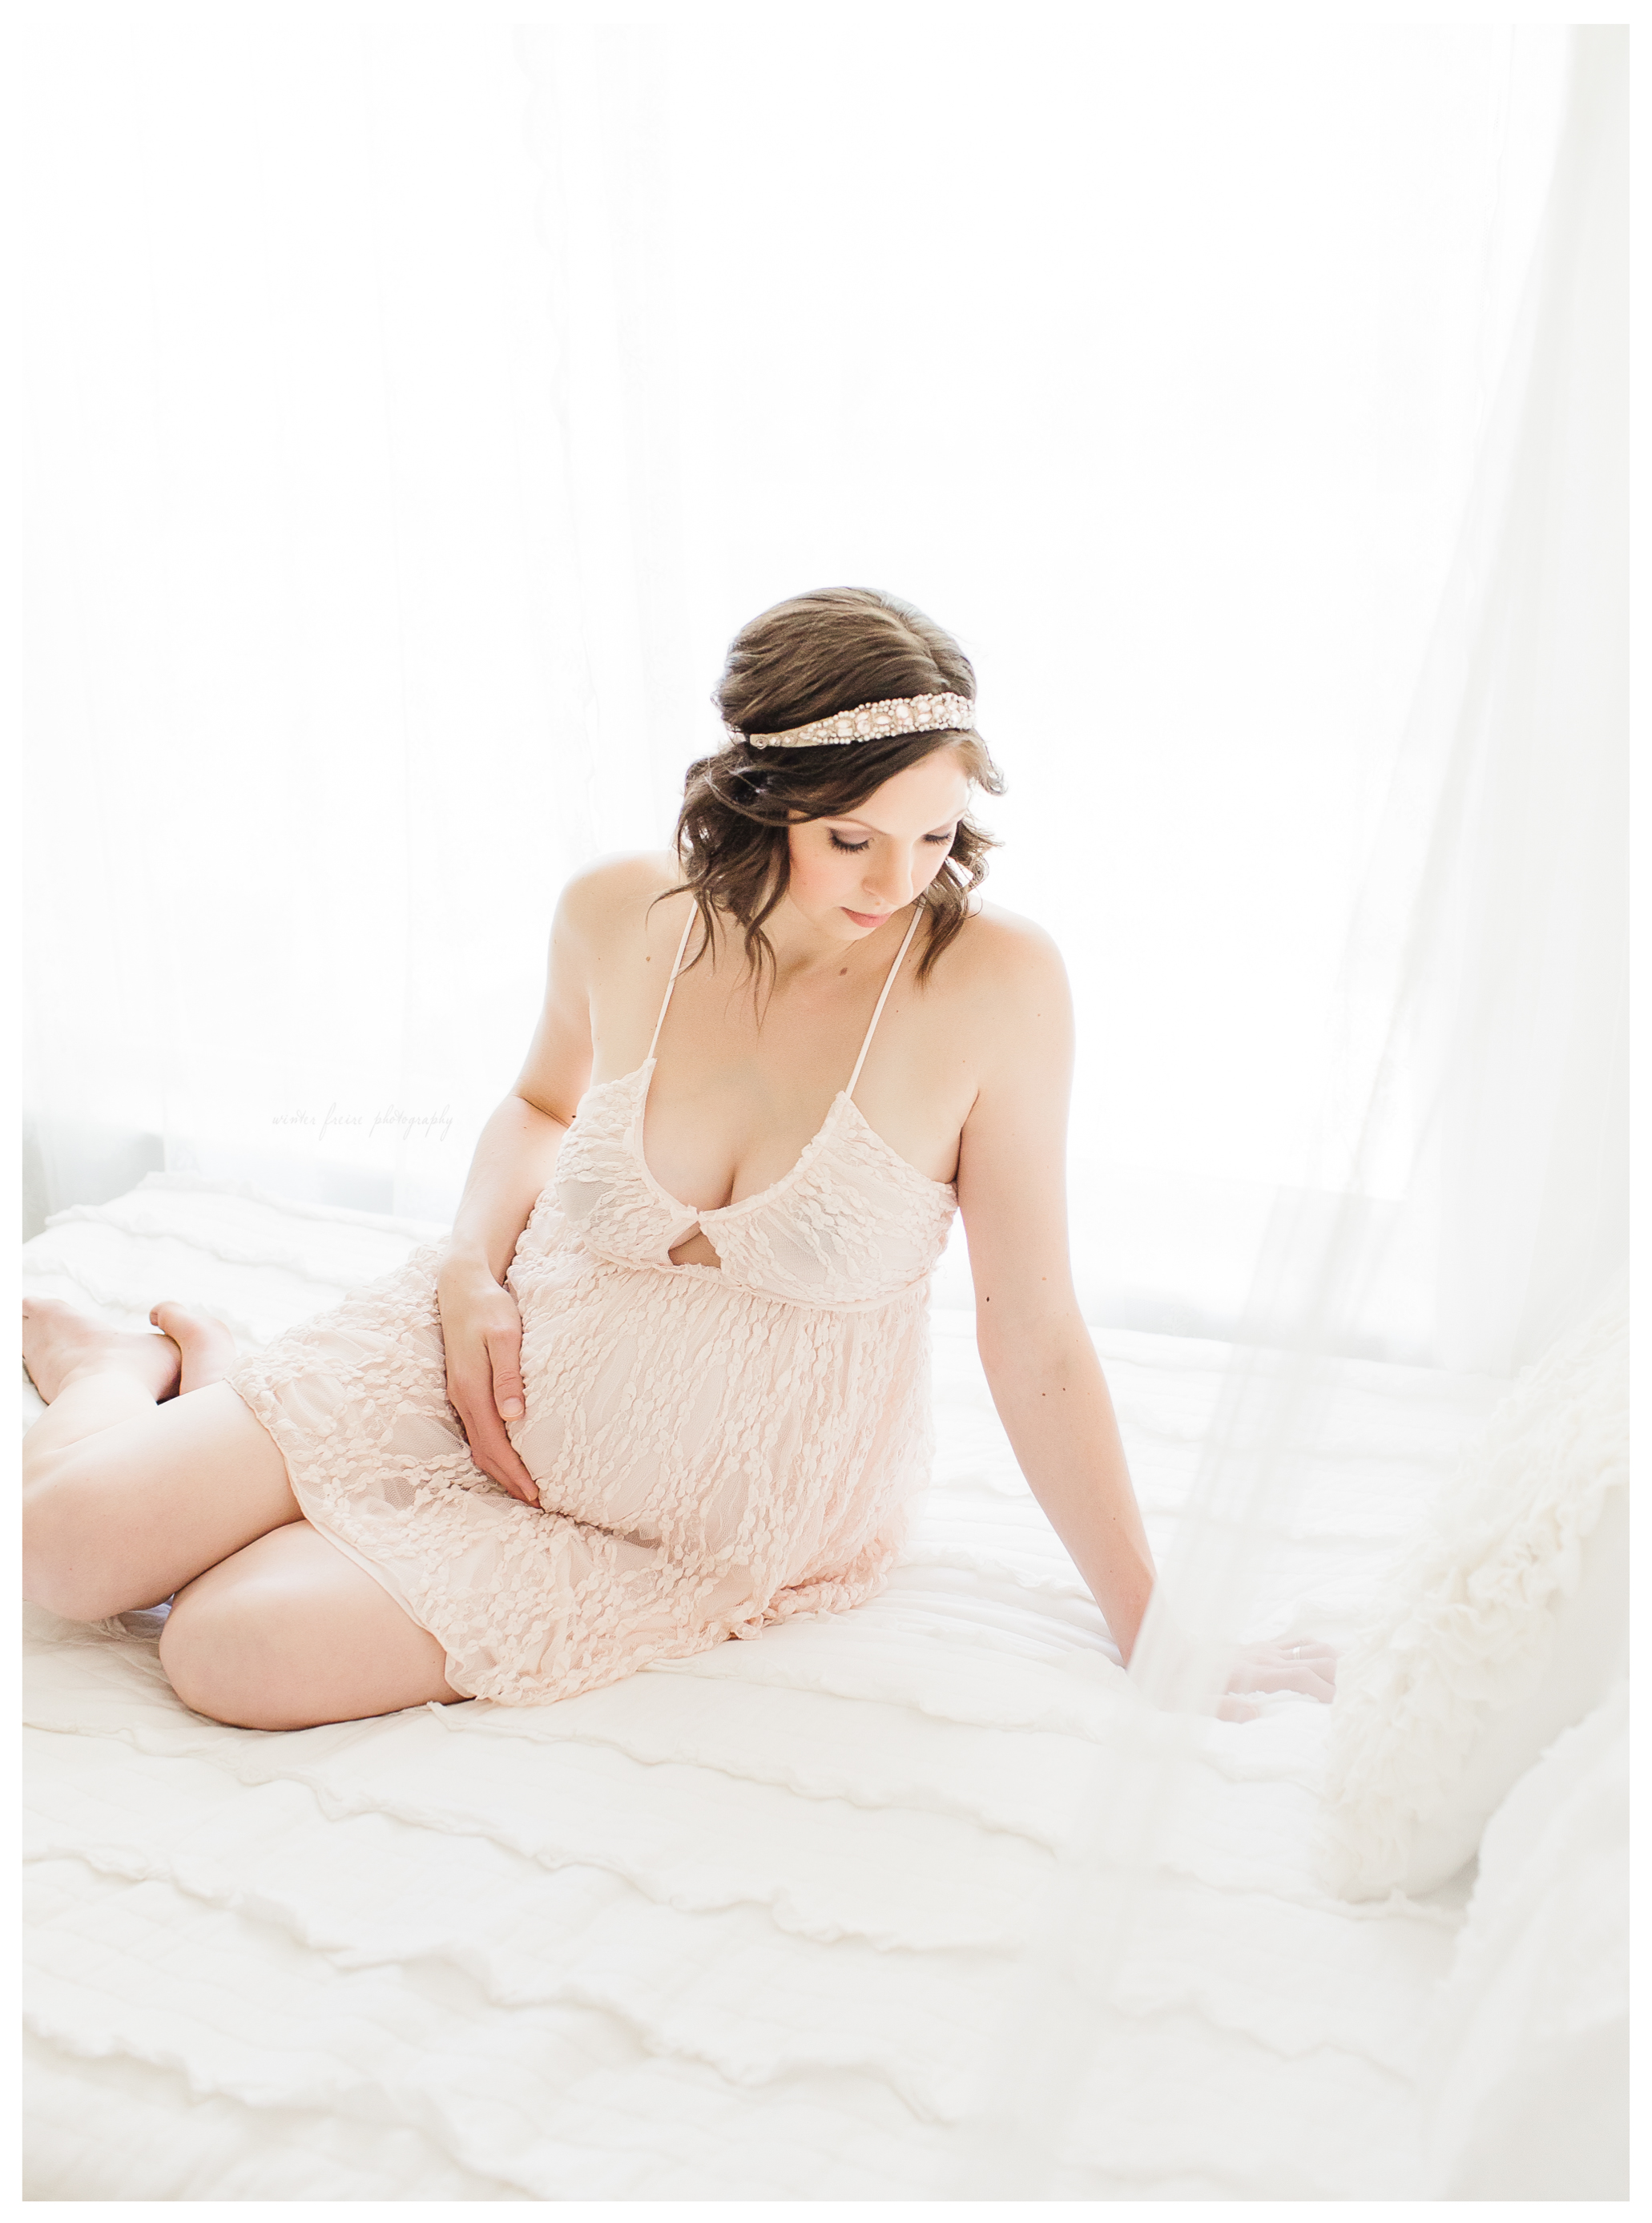 Winter Freire Photography | Sweet Pure Organic | Dayton, Ohio Maternity Photography | Dayton, Ohio Maternity Photographer | Motherhood | Maternity | Dayton, Ohio Photographer | Maternity Boudoir | Dayton, Ohio Photography